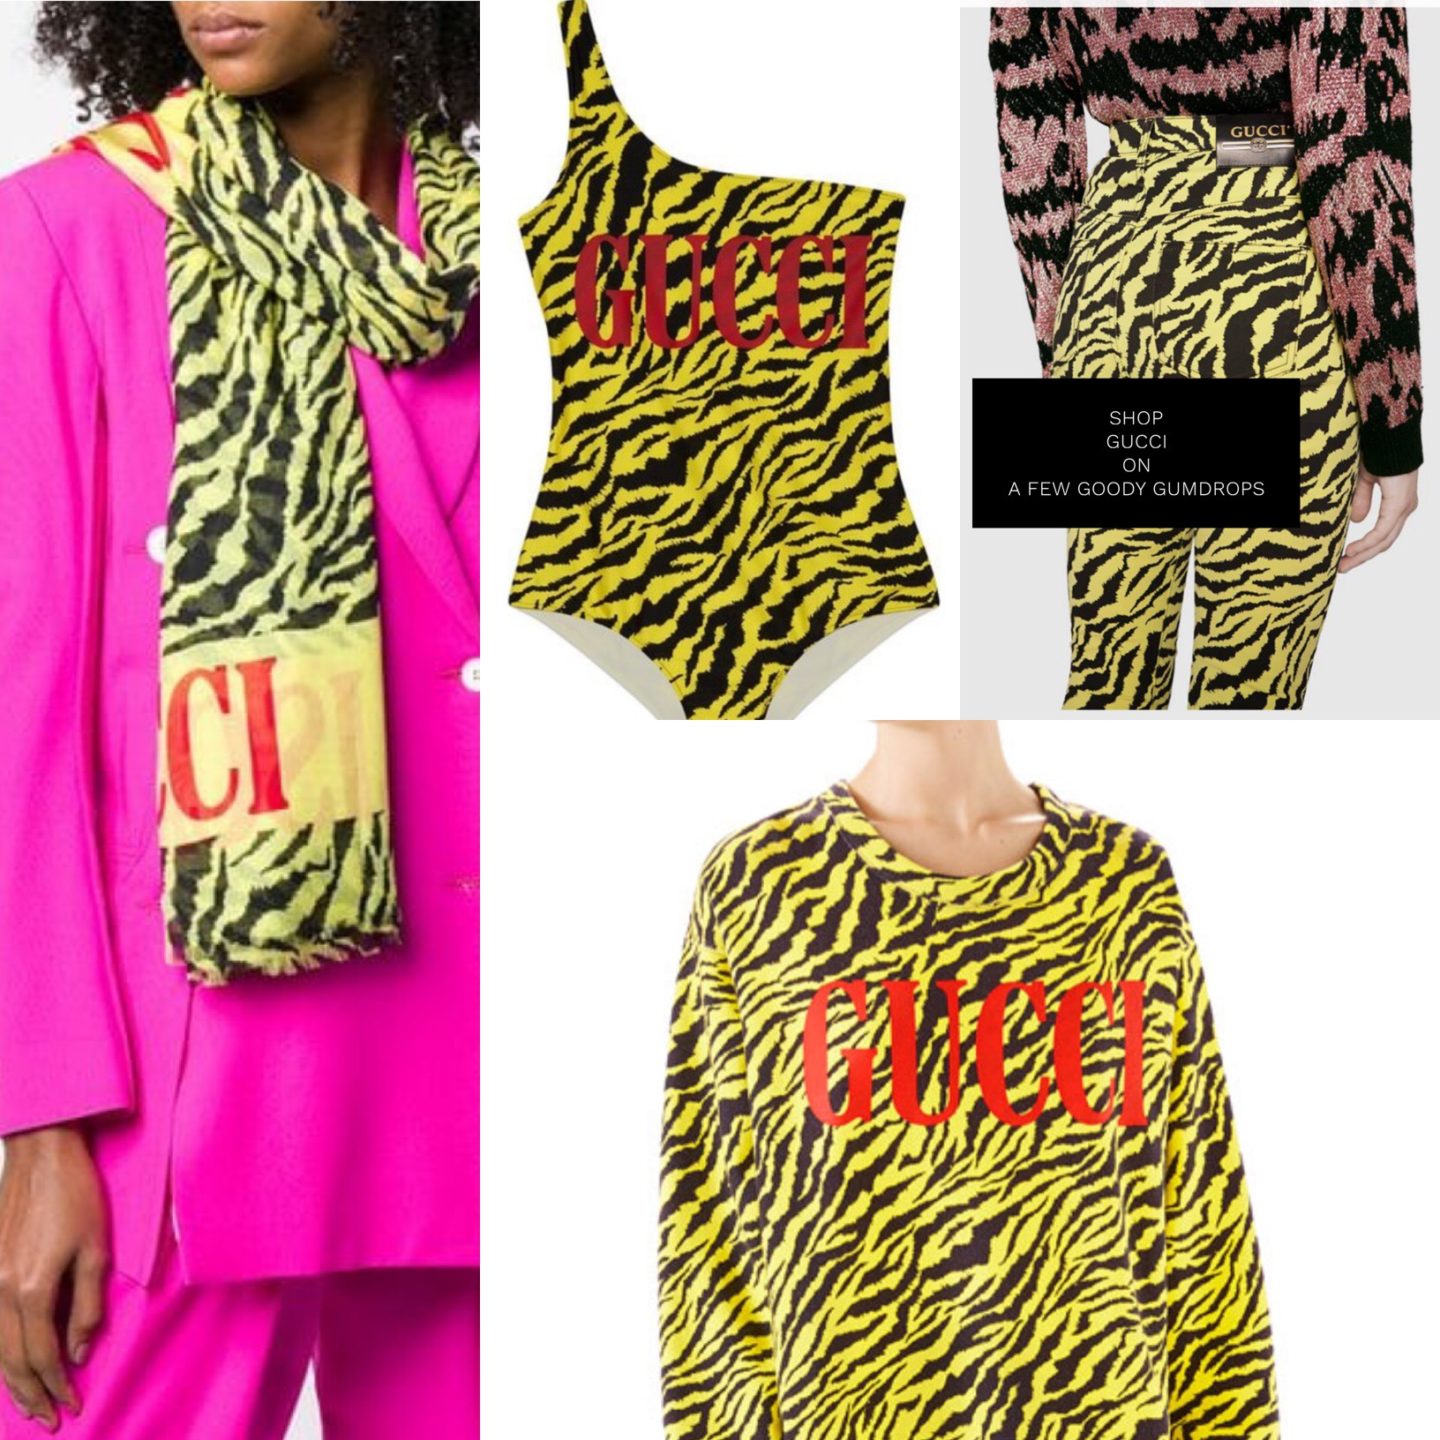 Animal prints fashion featured by top high end fashion blog, A Few Goody Gumdrops: image of a Gucci animal prints pieces